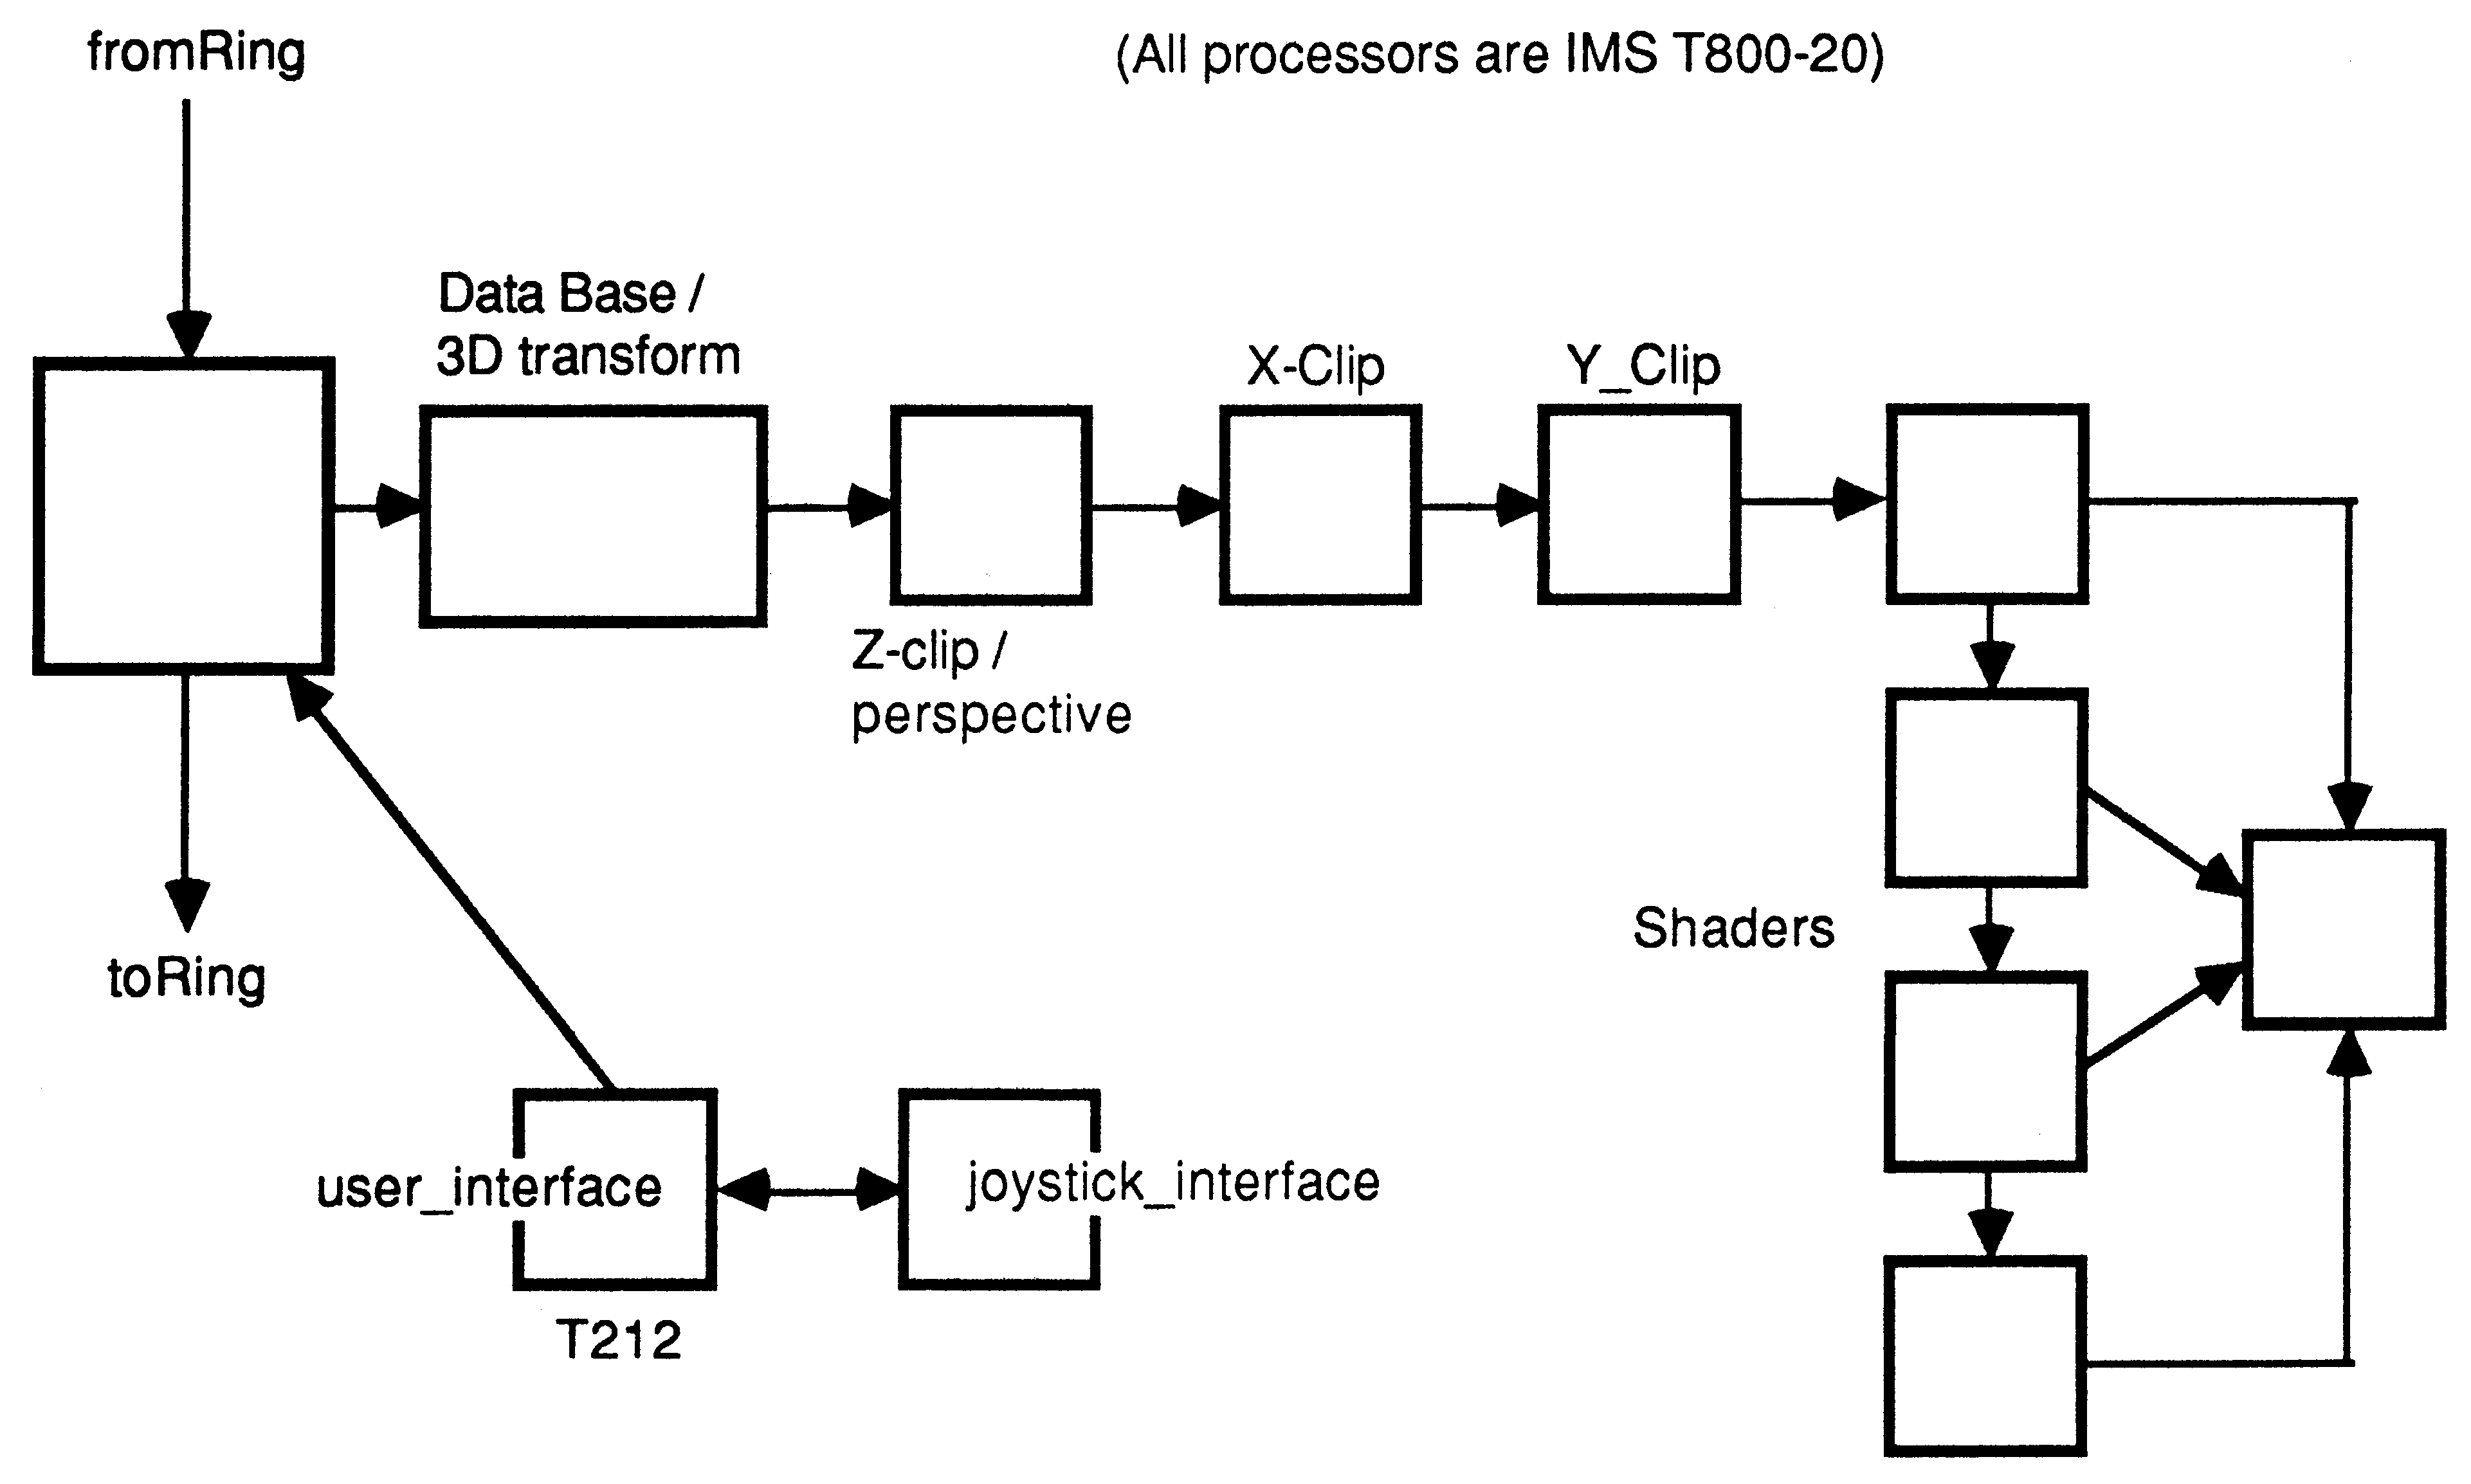 Hardware
implementation for a single user system